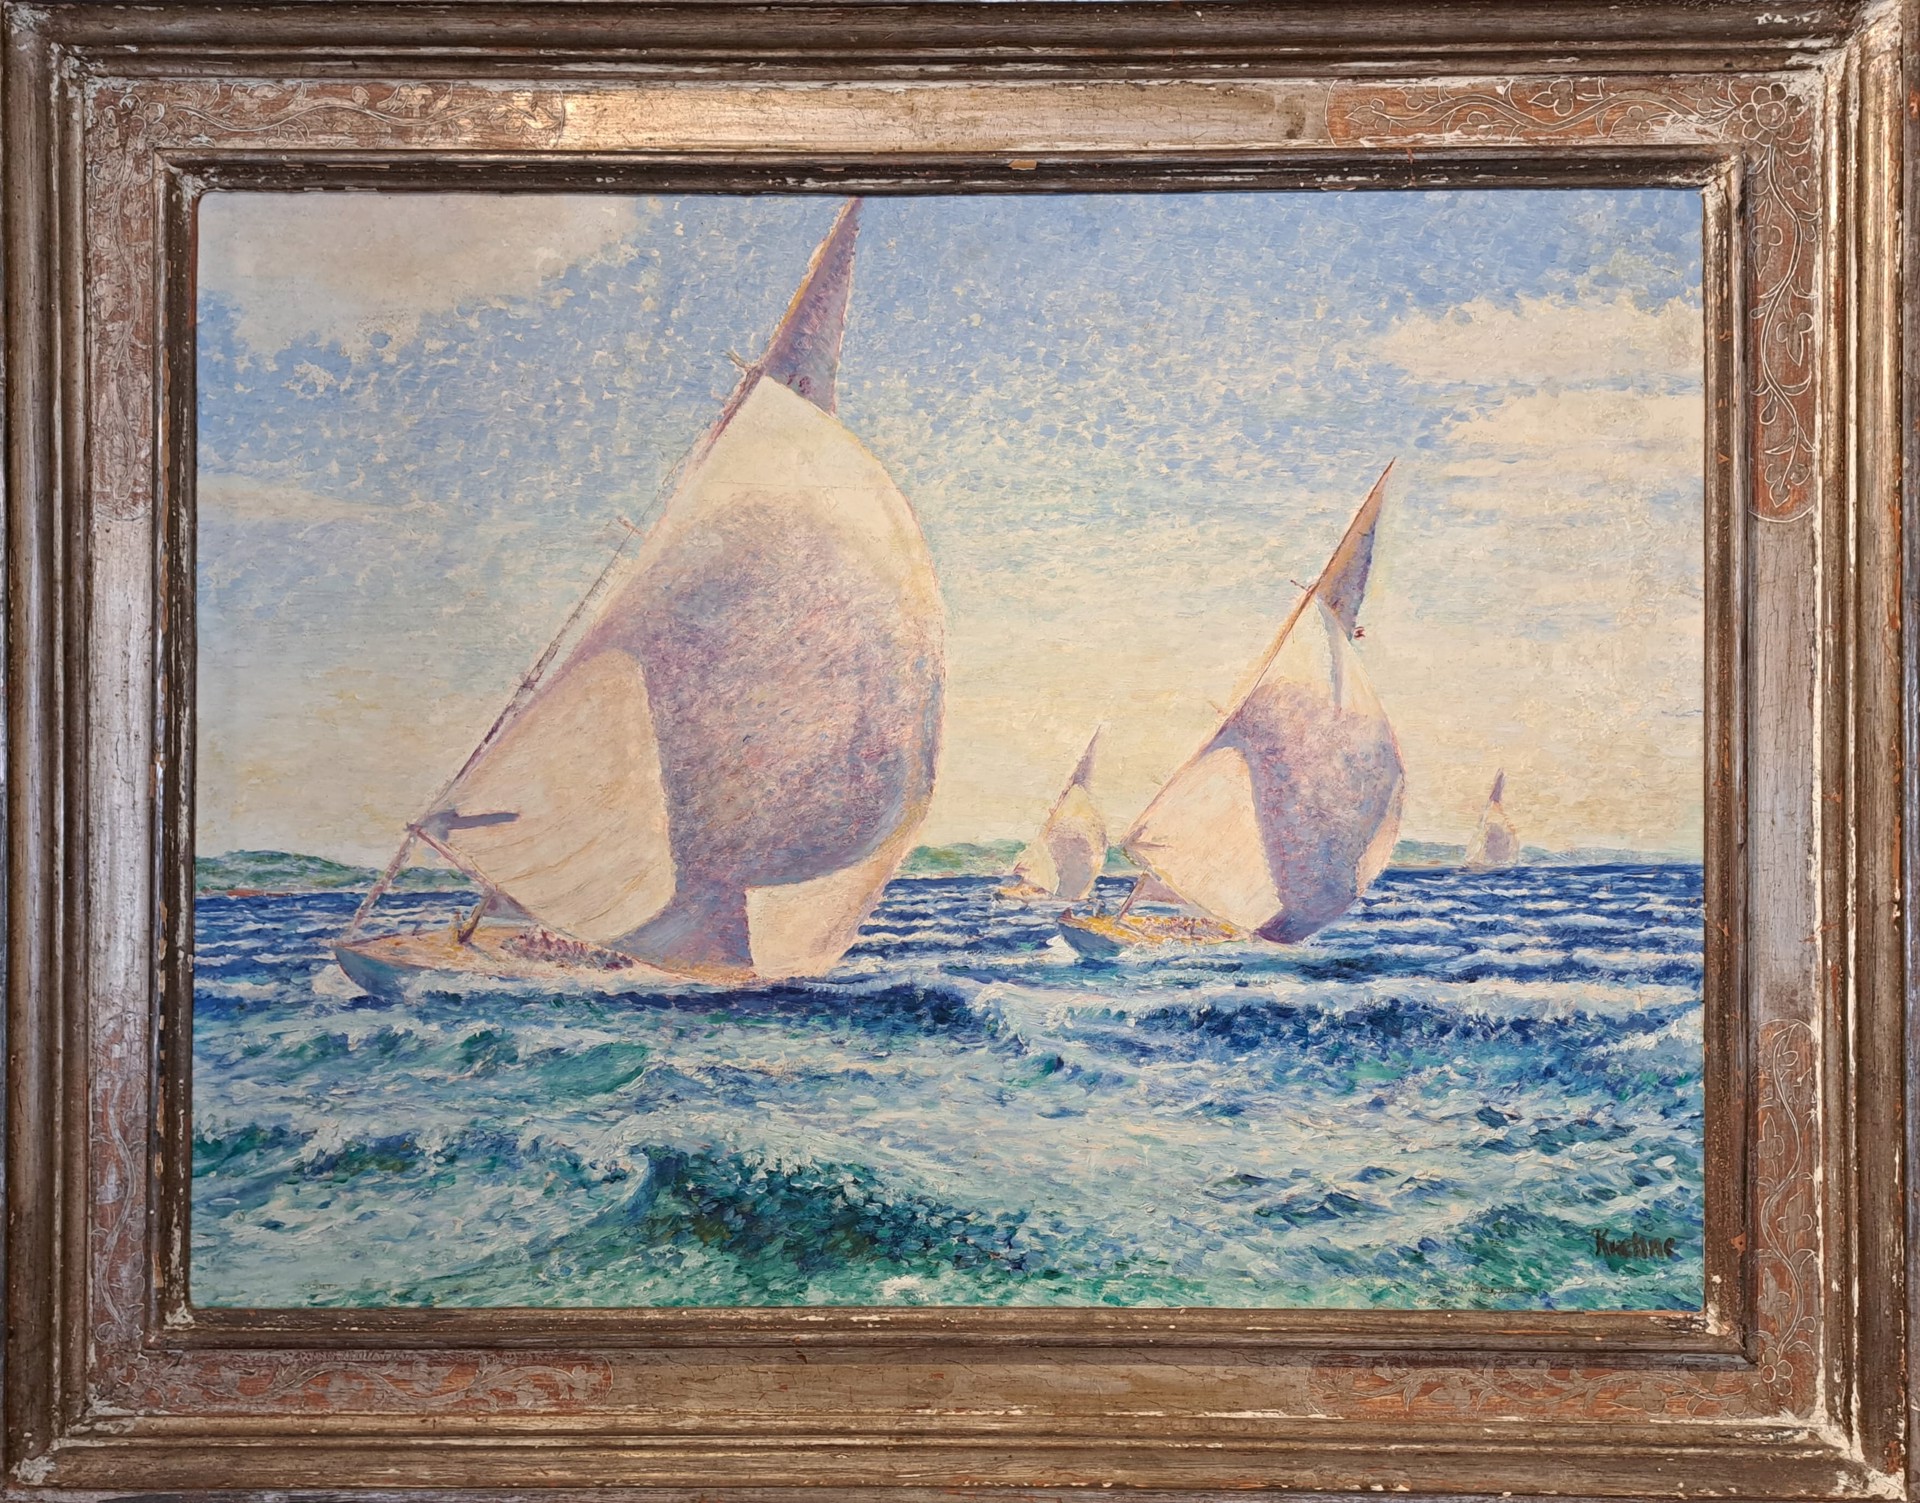 Spinnakers by Max Kuehne (1880-1968)